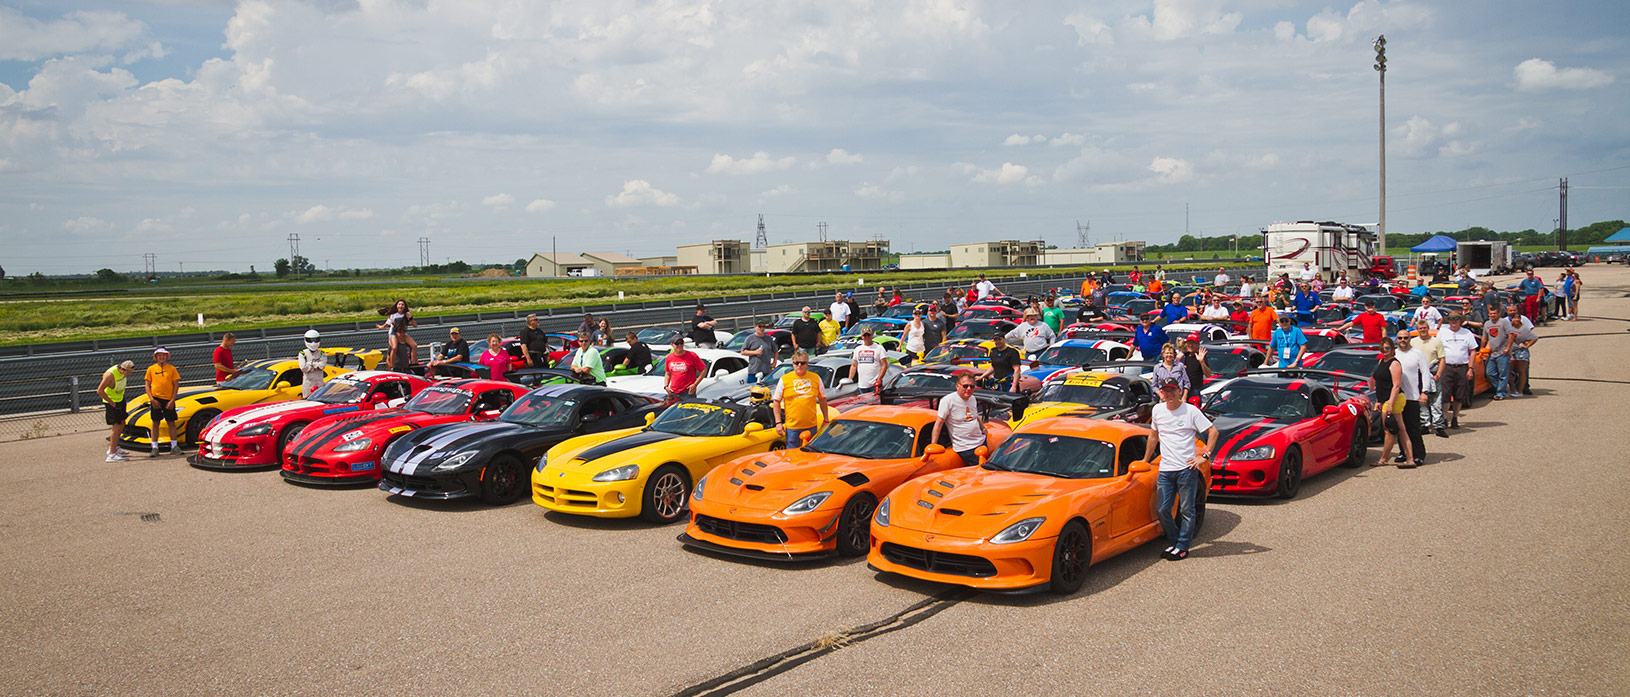 dodge vipers lines up and all their owners standing next to them